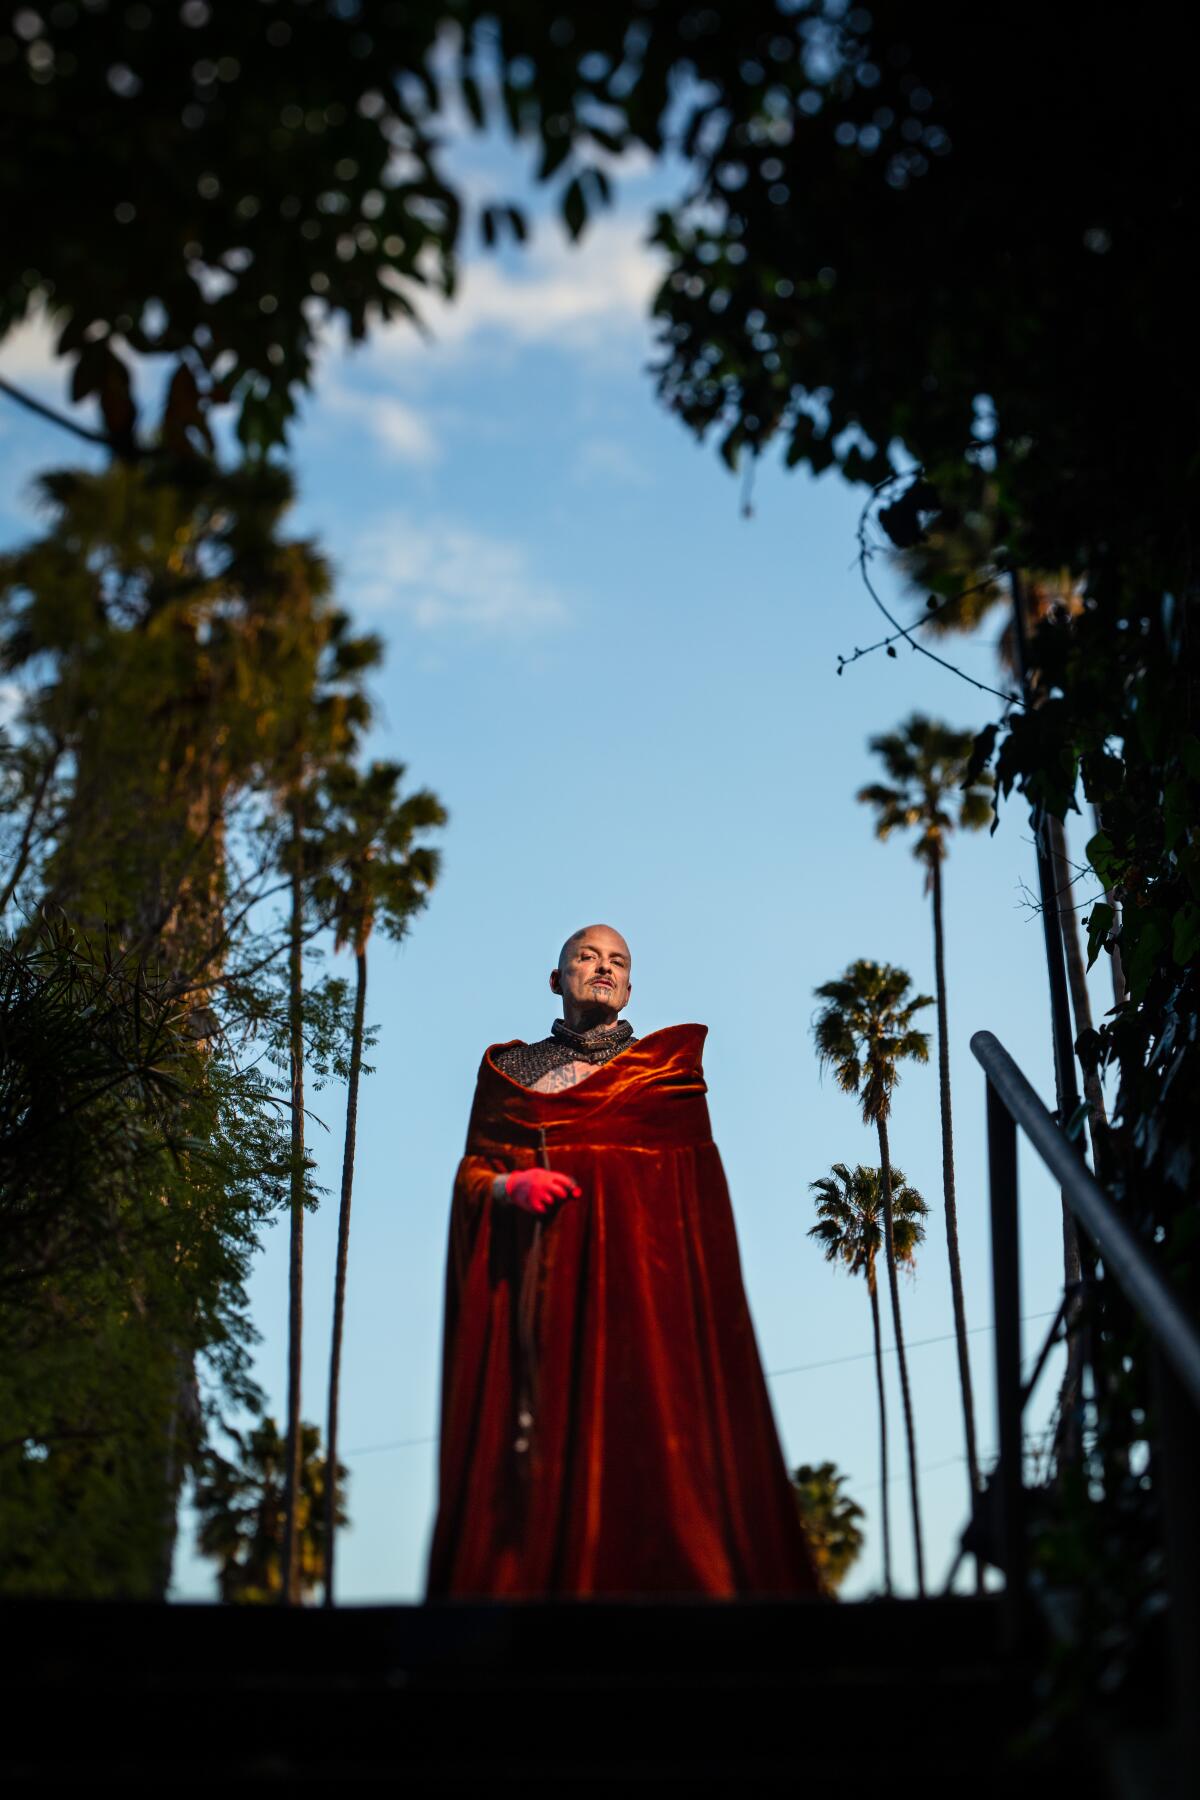 Performance artist Ron Athey, wearing a red cape, stands among trees.